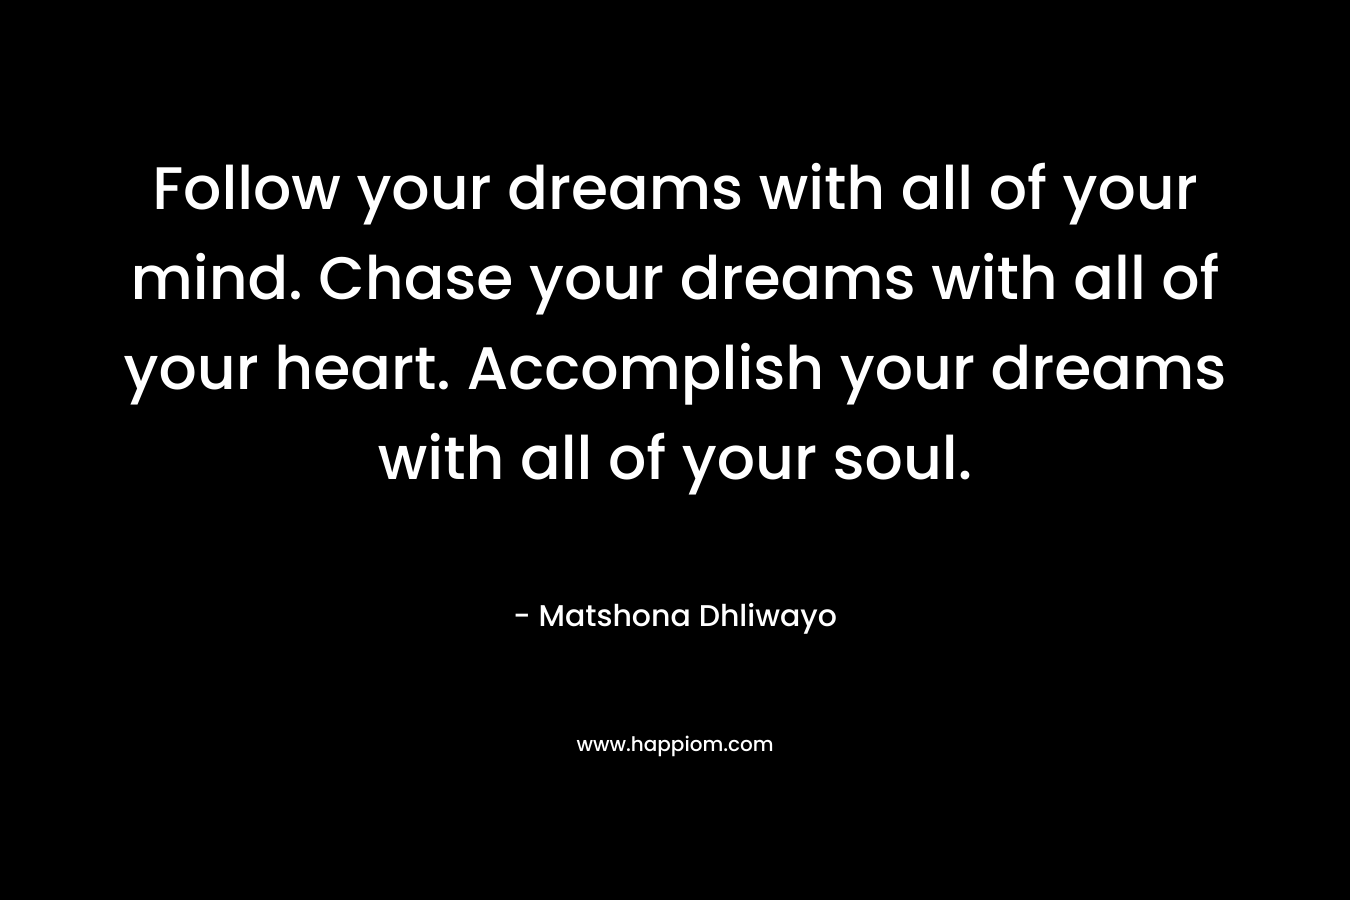 Follow your dreams with all of your mind. Chase your dreams with all of your heart. Accomplish your dreams with all of your soul.